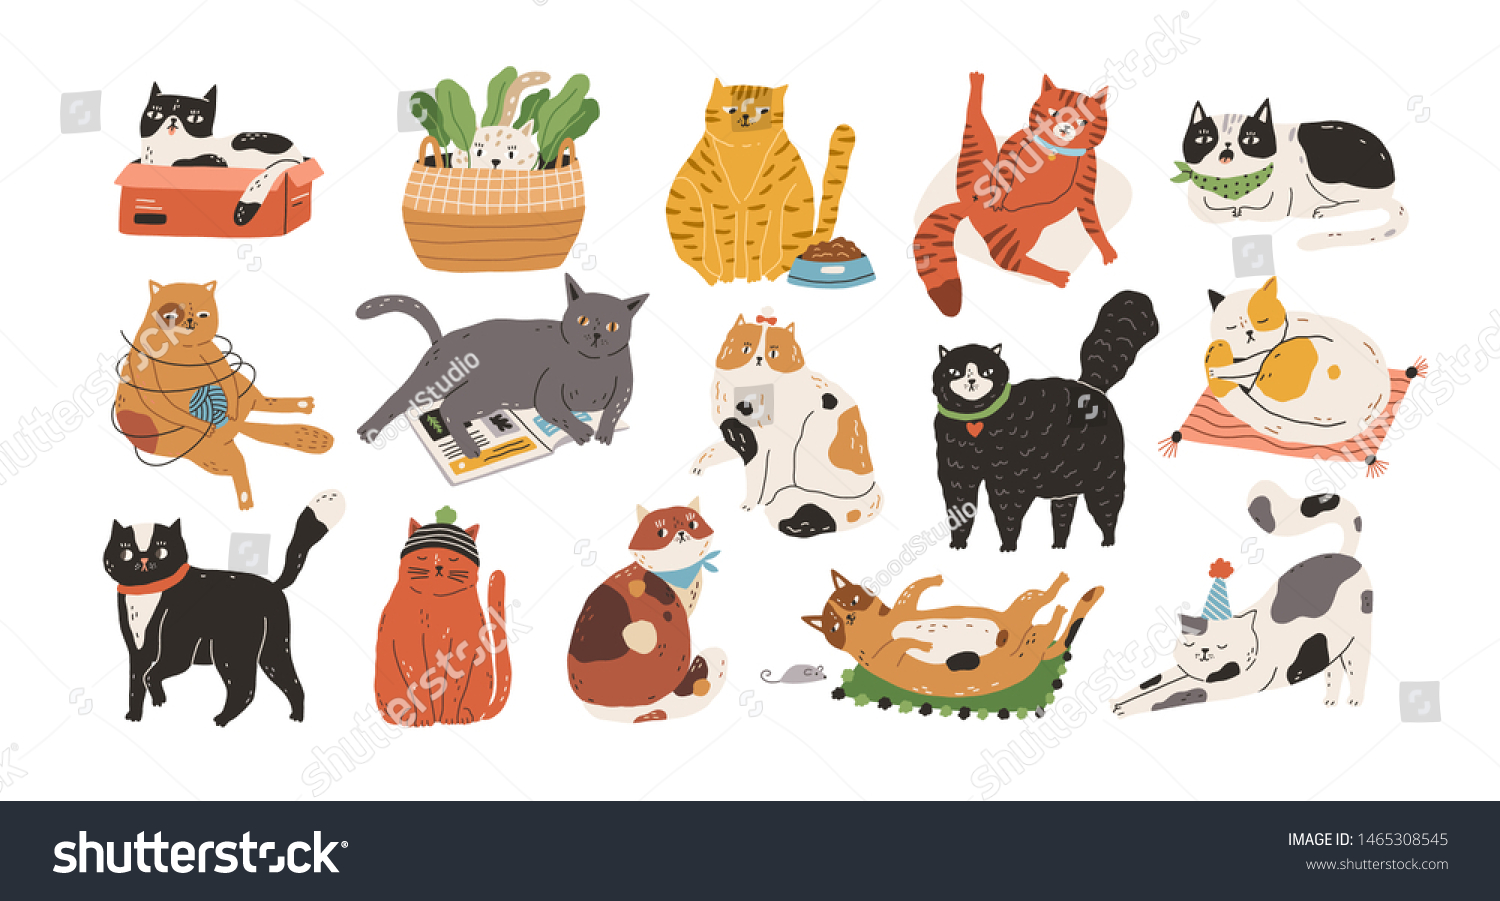 stock-vector-bundle-of-adorable-cats-sleeping-stretching-itself-playing-with-ball-of-yarn-hiding-in-box-or-1465308545